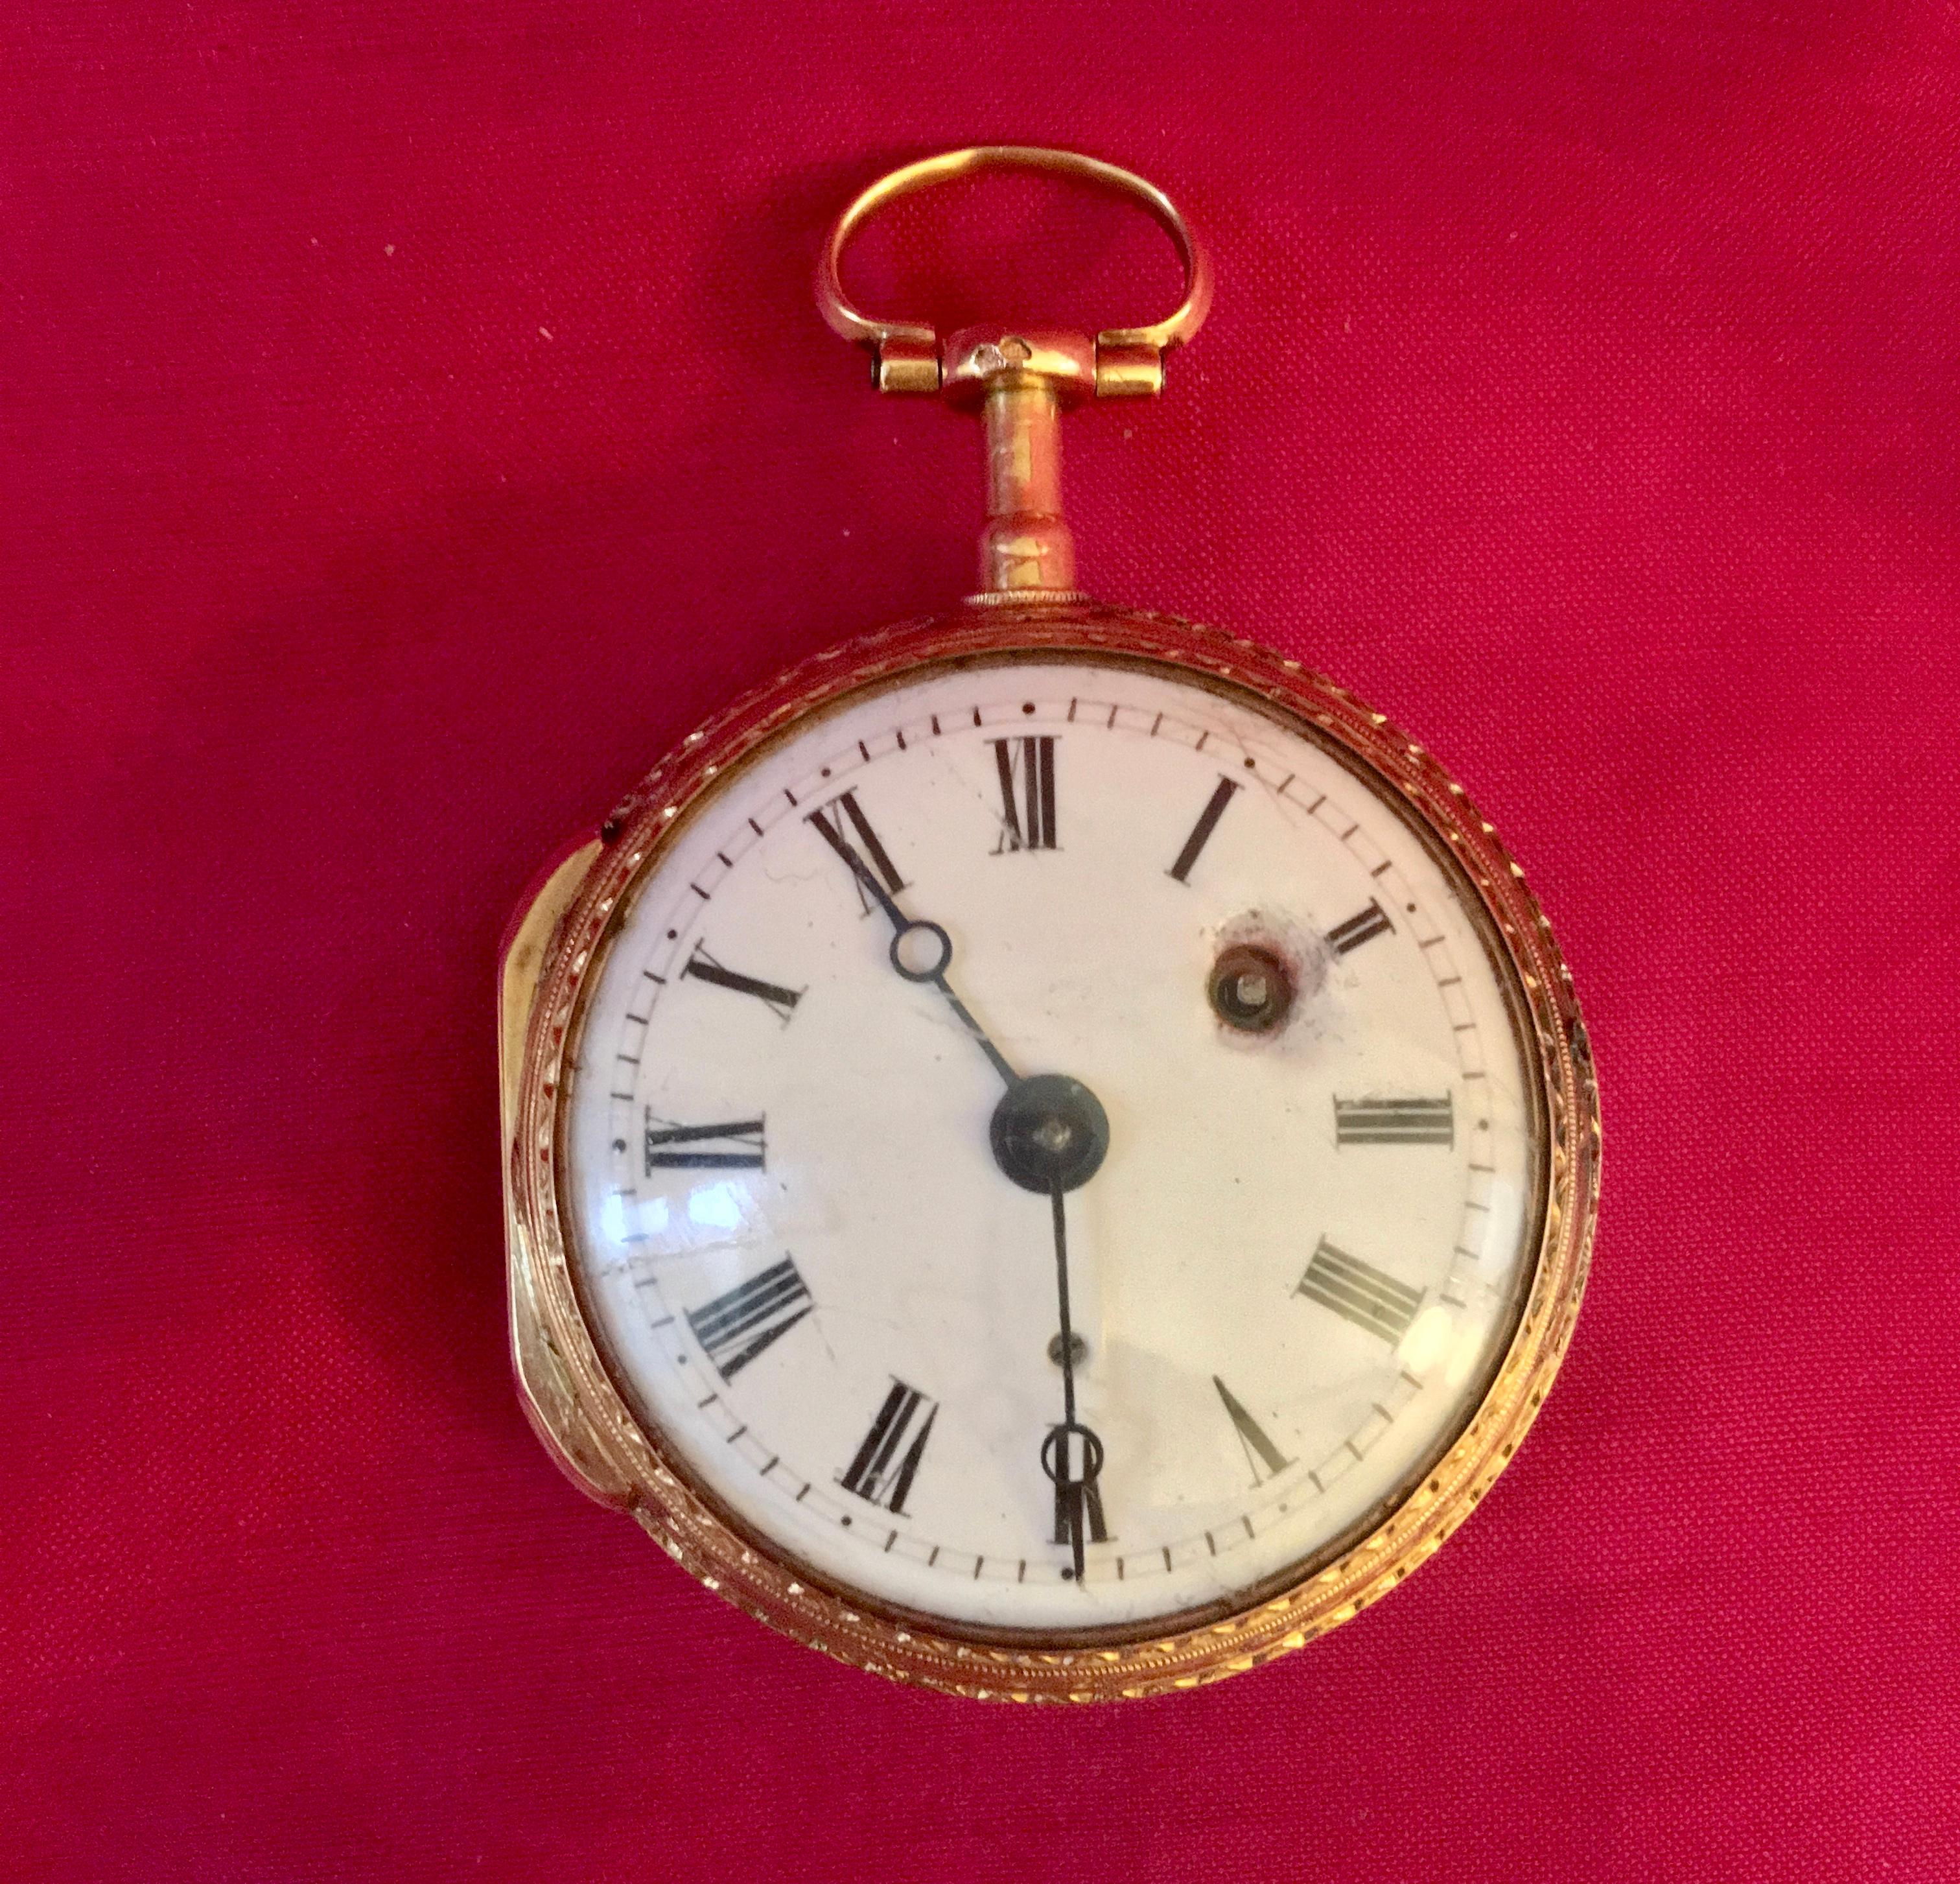 A beautiful handmade Swiss fusee movement 18-karat tri-color gold blue enamel verge pocket watch, circa 1785. In excellent working order.